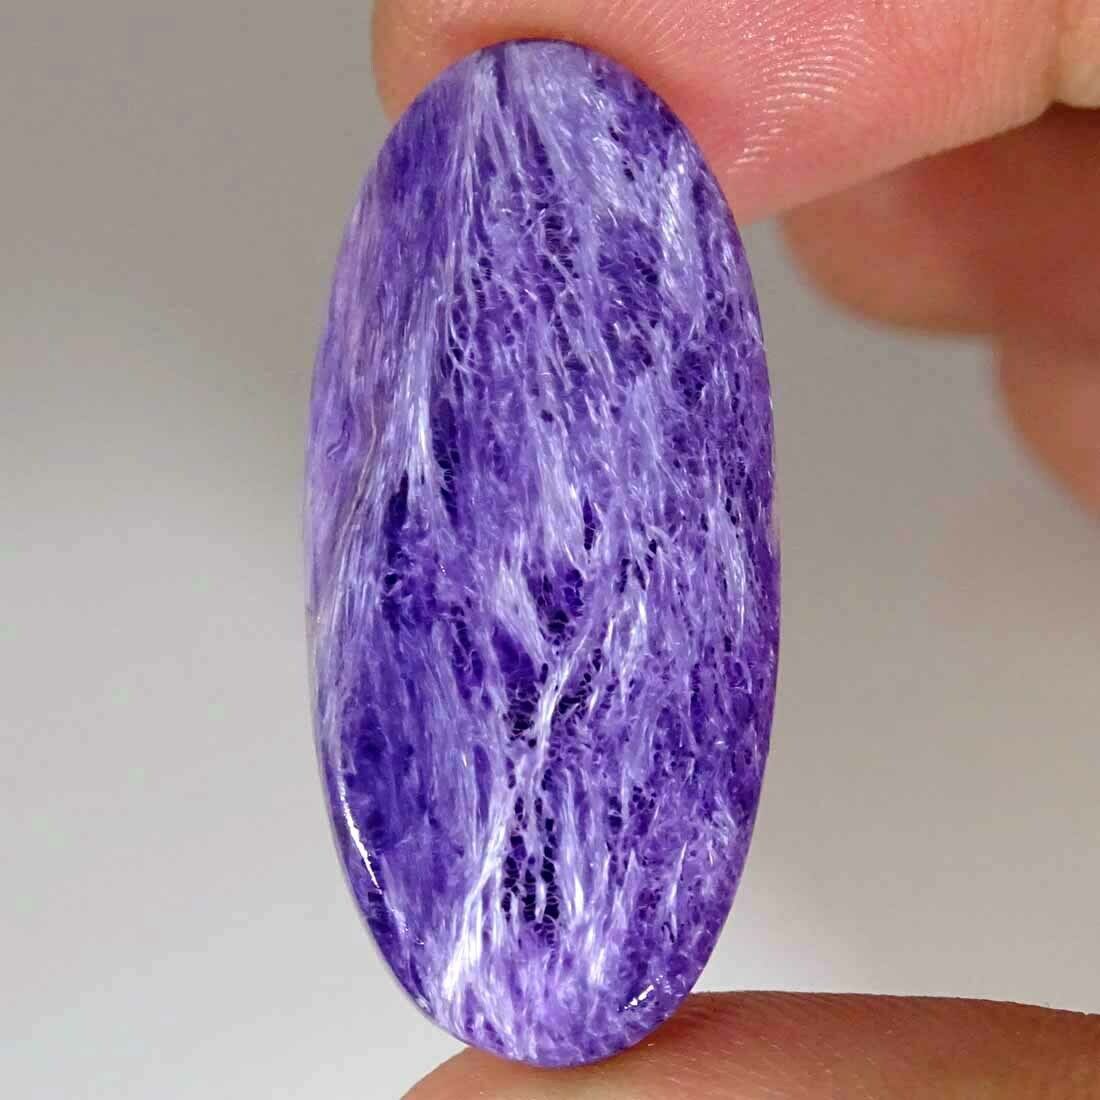 24.30cts Natural Purple Charoite Oval Russian Cabochon Loose Gemstone